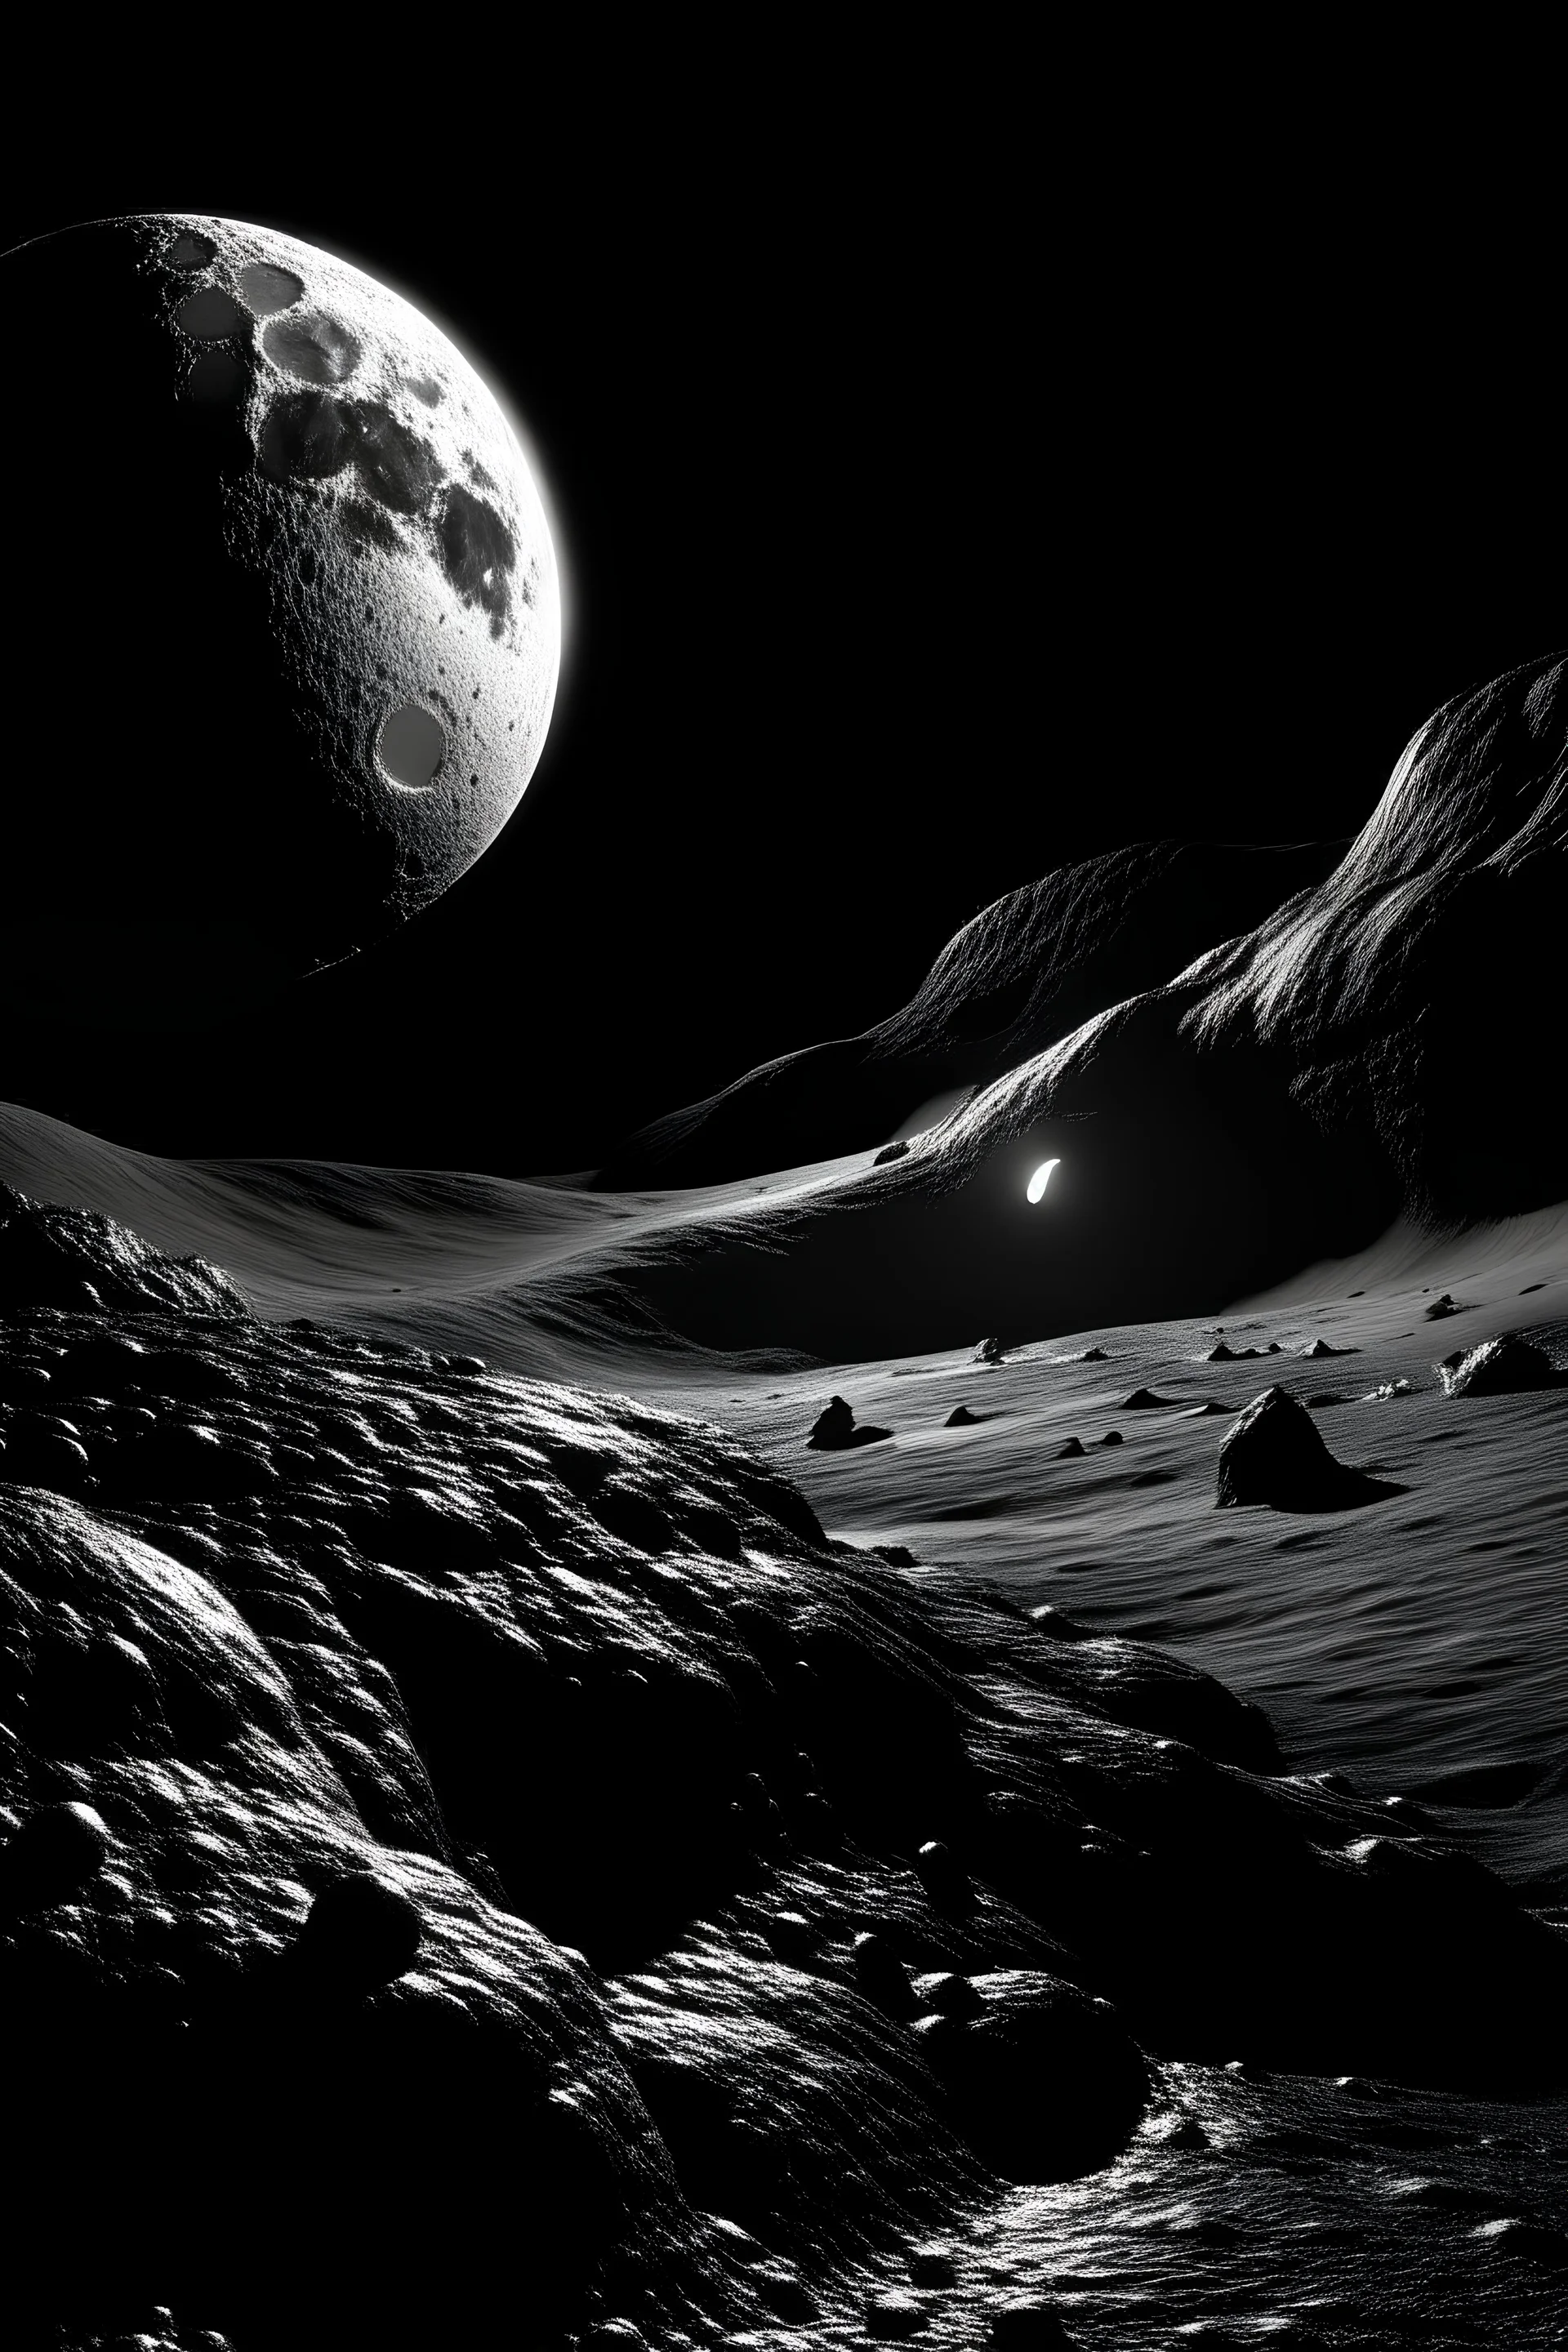 alien craft exits a cave on the moon see from afar